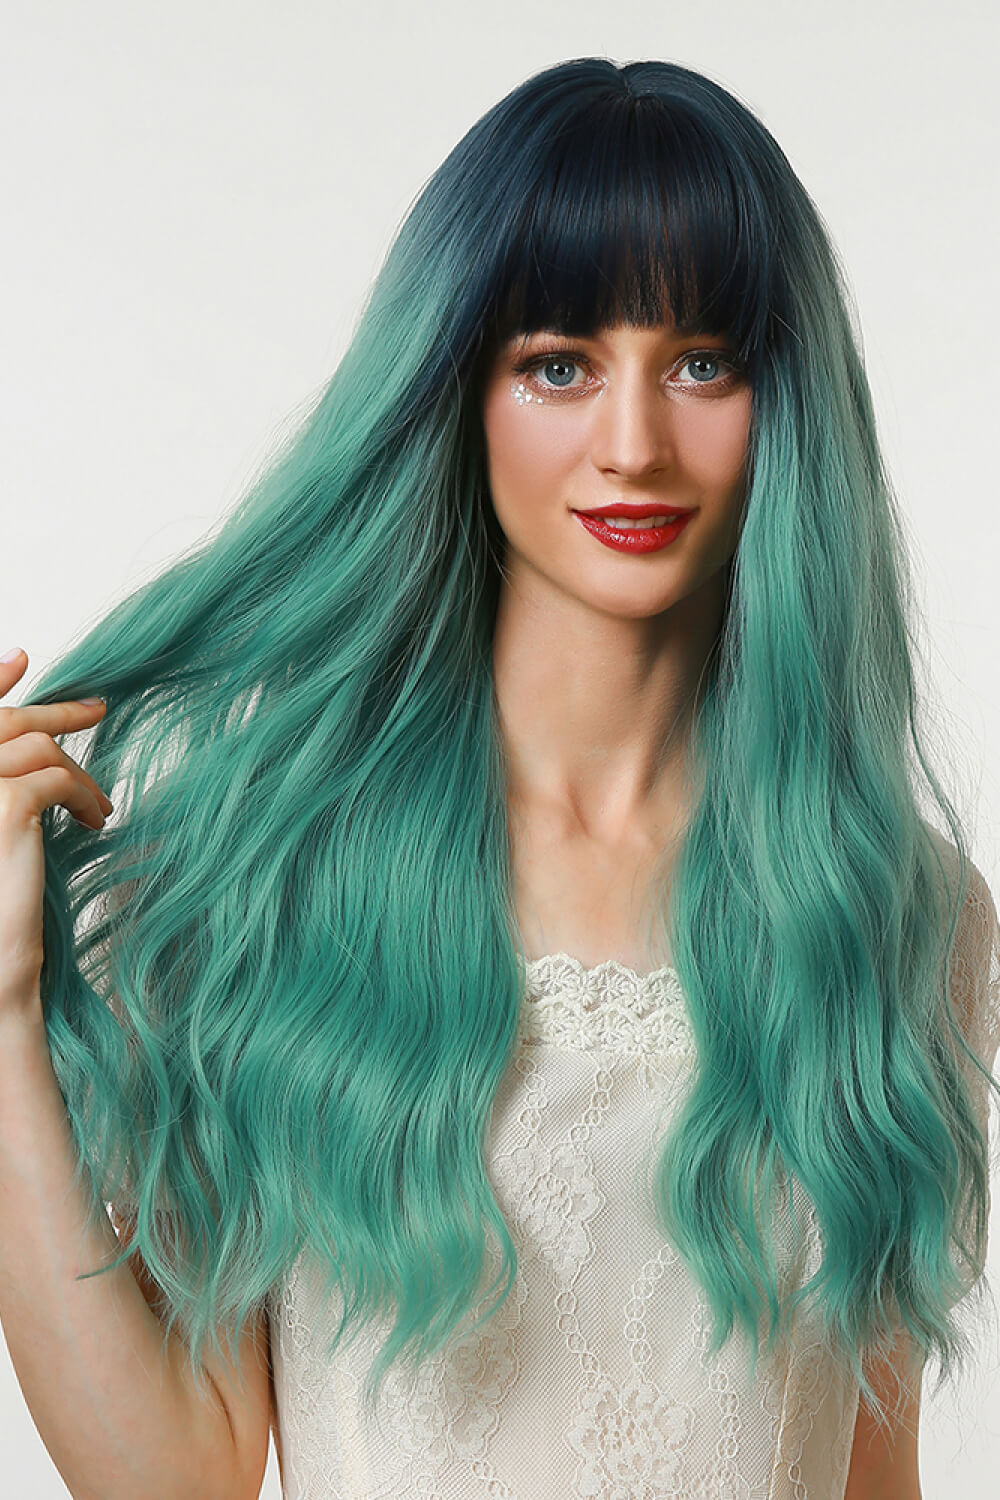 13*1" Full-Machine Wigs Synthetic Long Wave 26" in Seafoam Ombre - AllIn Computer